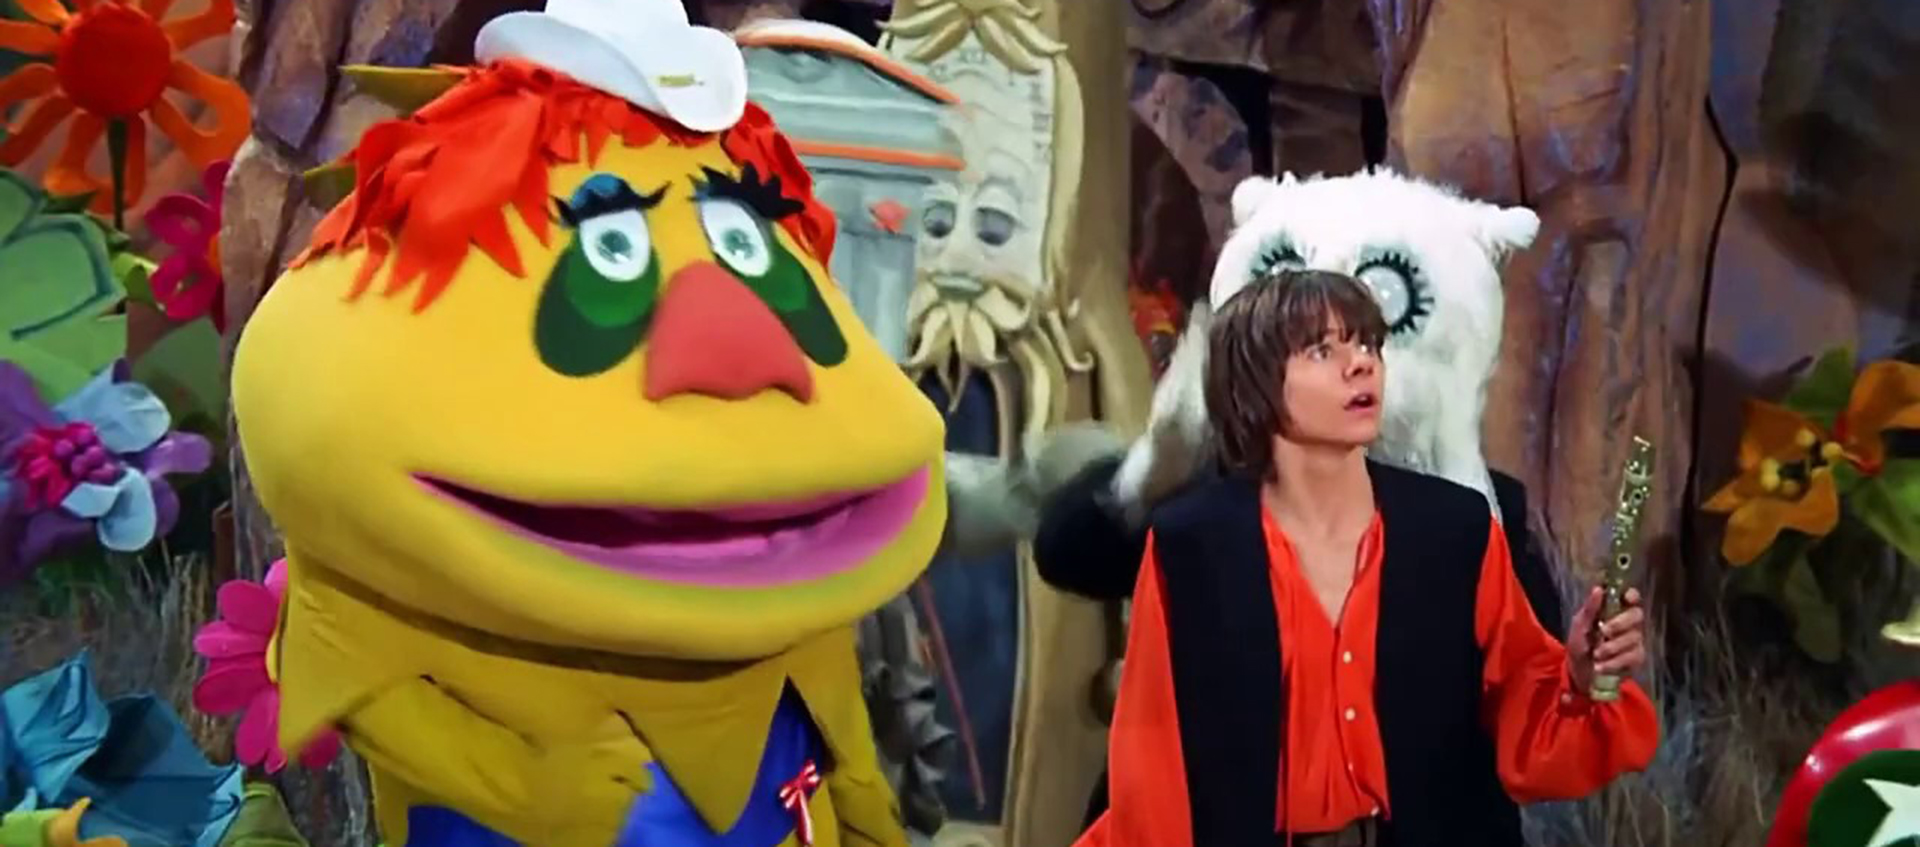 HR Pufnstuf, a puppet in bright bold colors and a very large head including green eyes and tiny white hat stands next to a young boy in a red shirt and black vest holding a flute